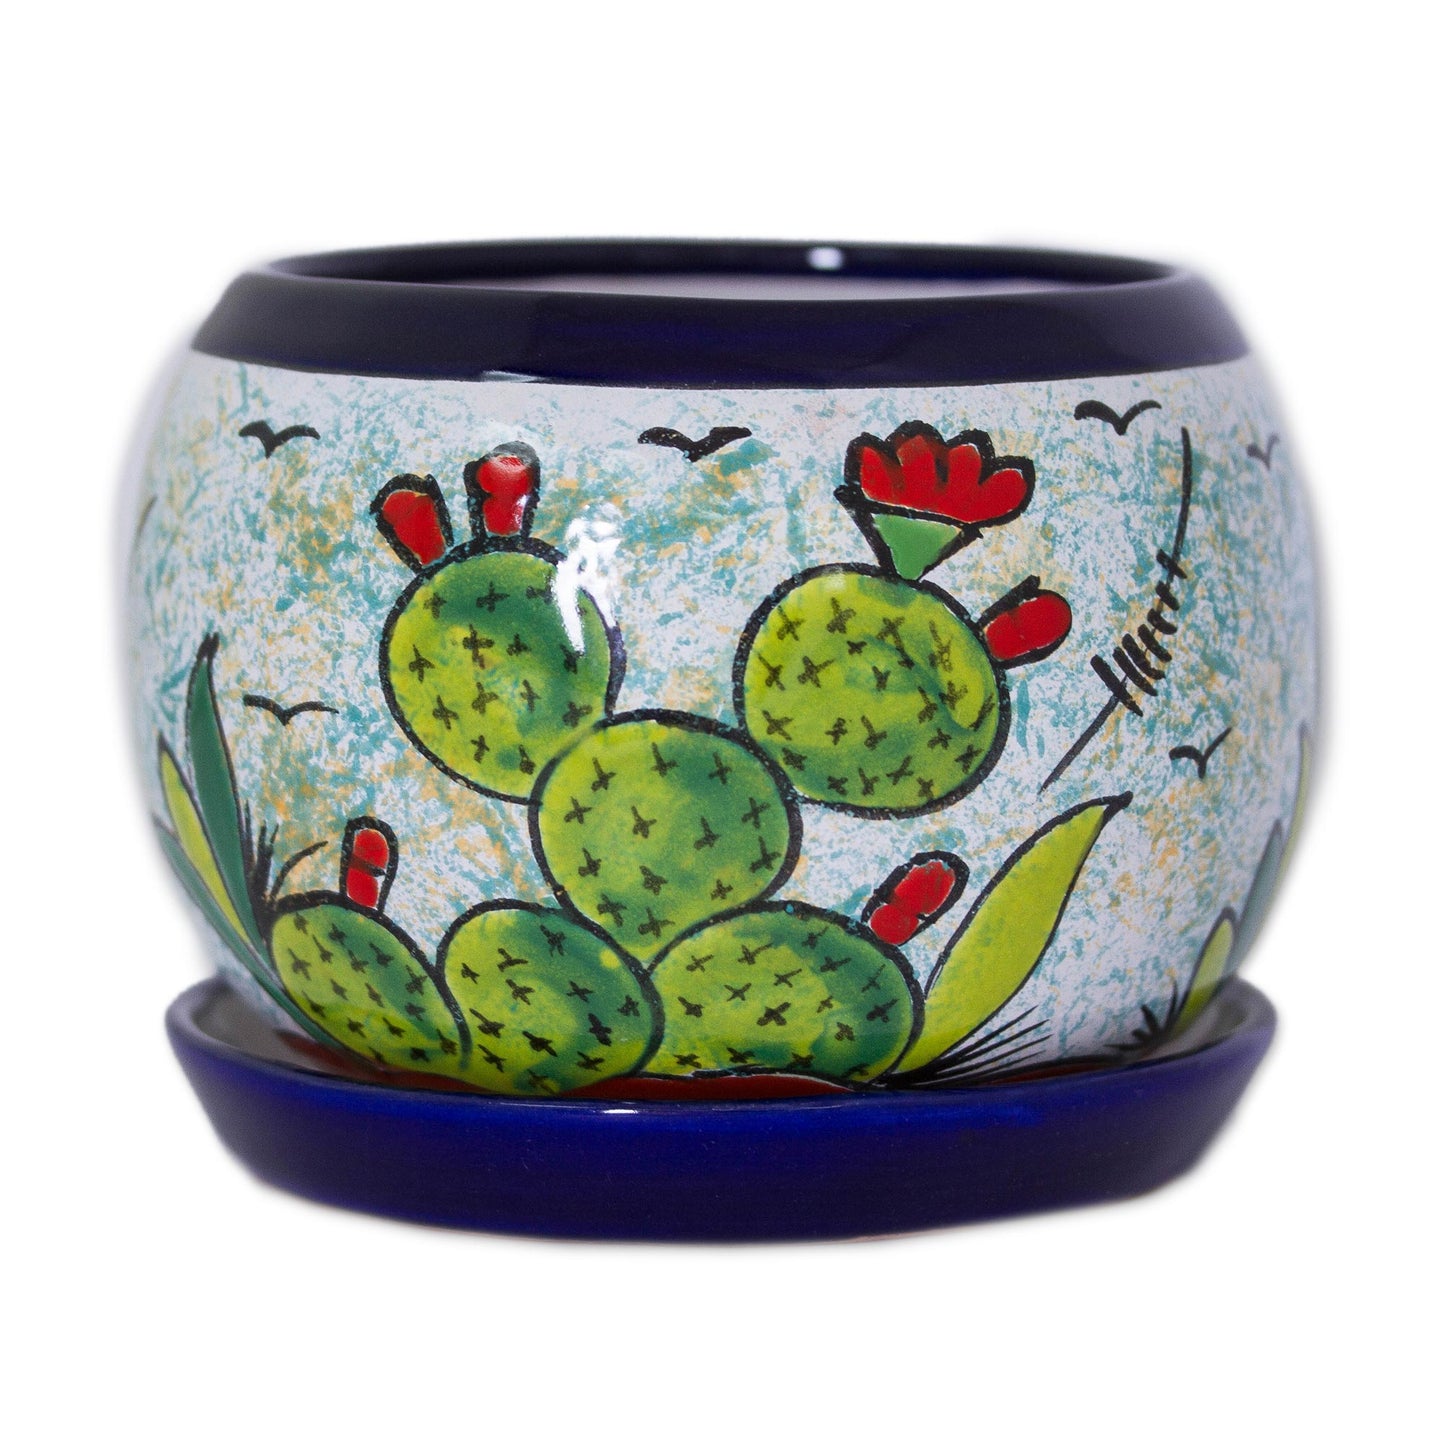 Mexican Memories Handcrafted Ceramic Flower Pot with Cactus Images